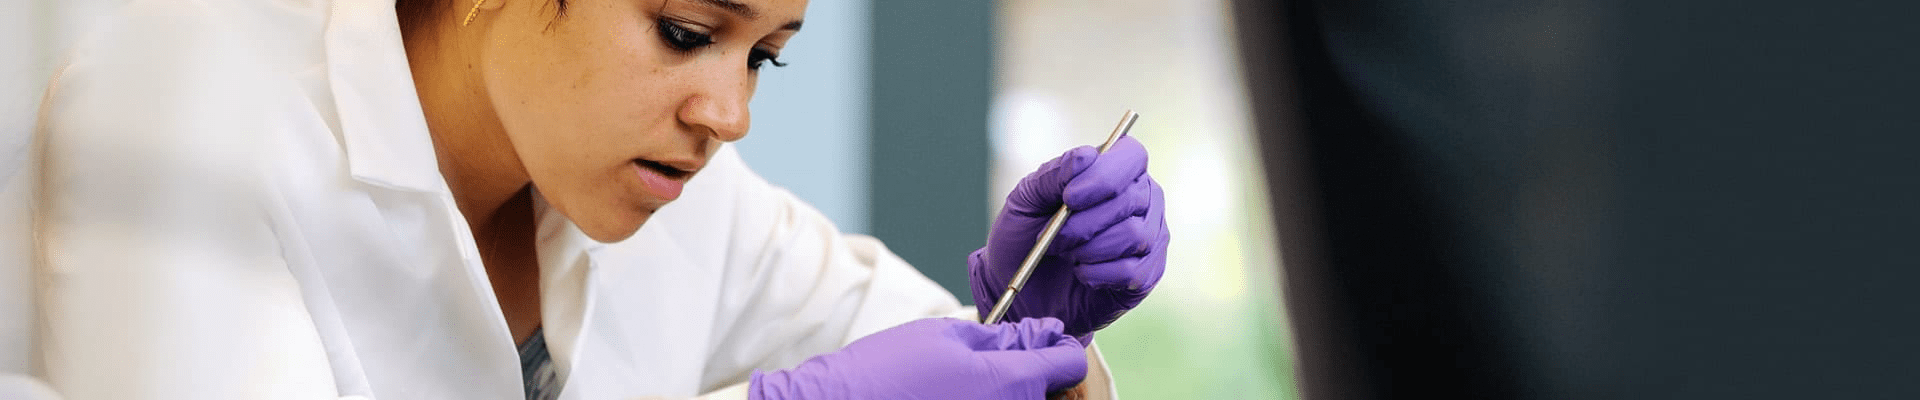 a female student wearing a white lab coat and purple gloves holds a tool